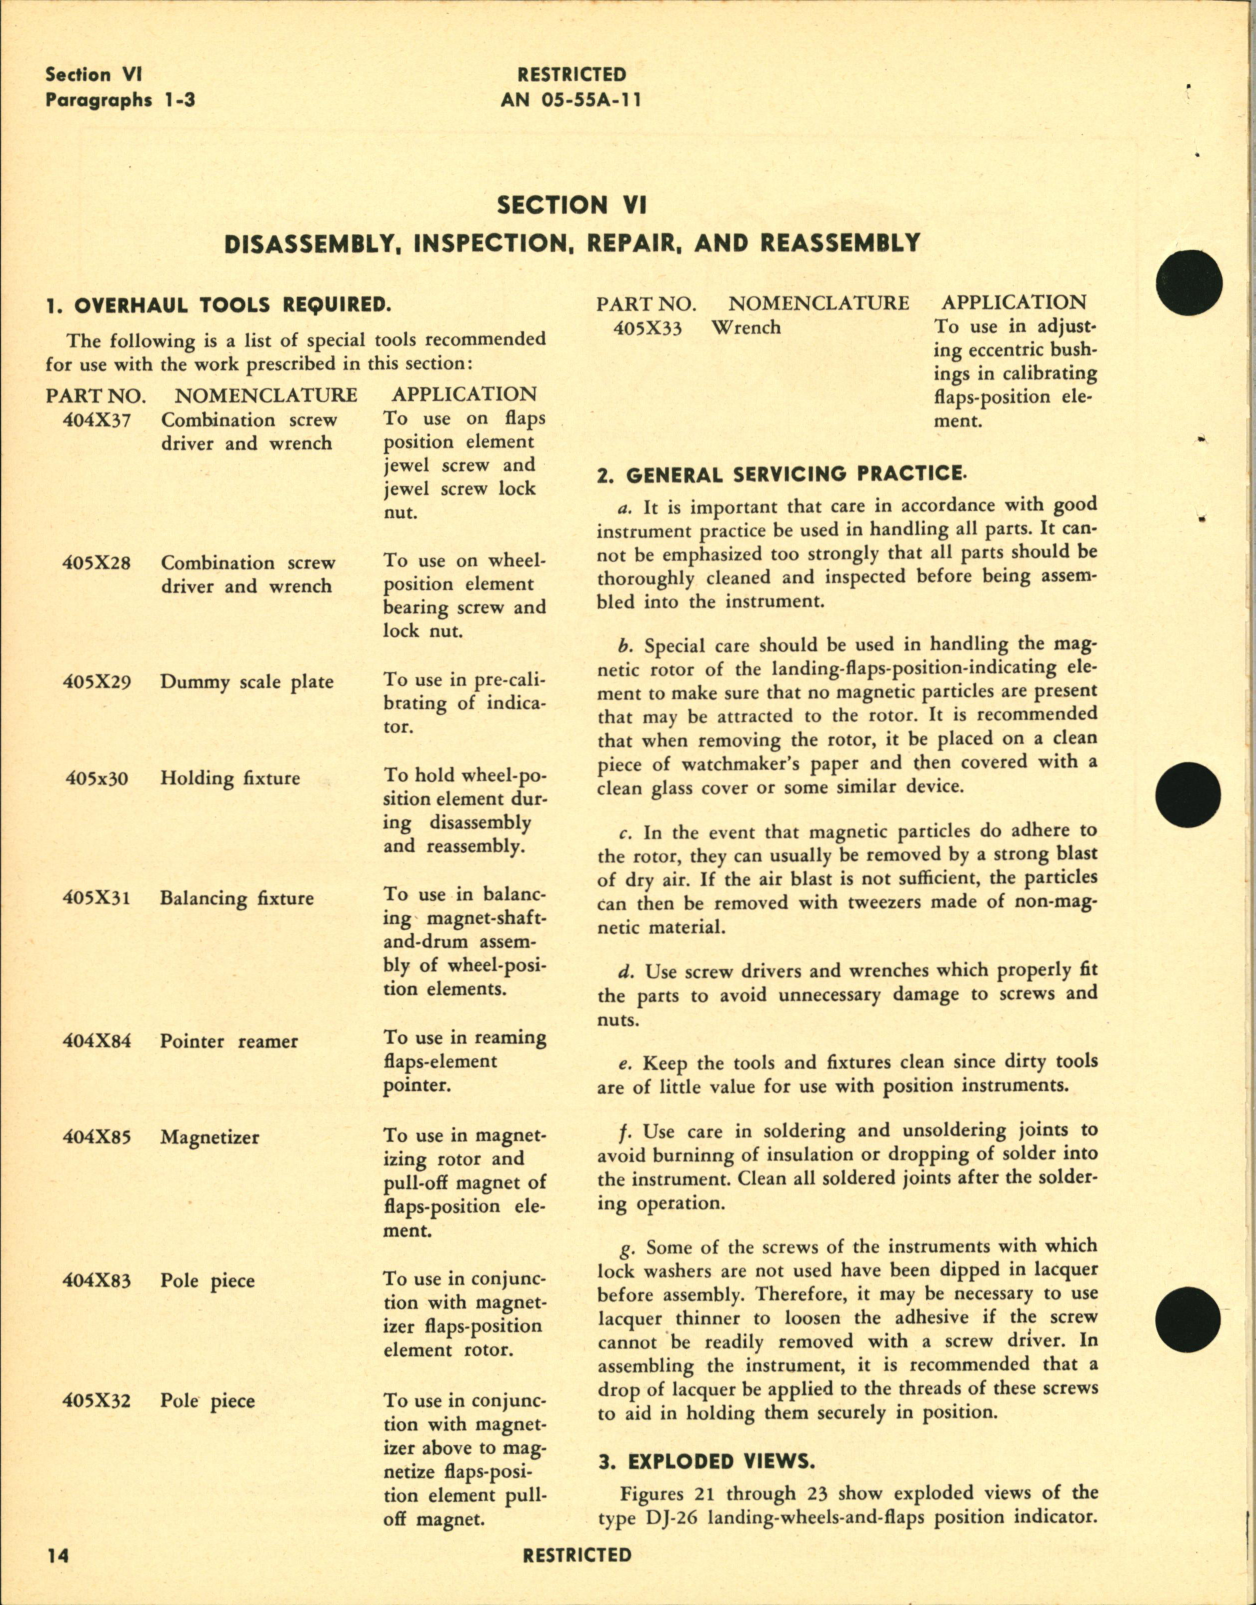 Sample page 7 from AirCorps Library document: Operation, Service, & Overhaul Instructions with Parts Catalog for Landing-Wheels and Flaps Position Indicators